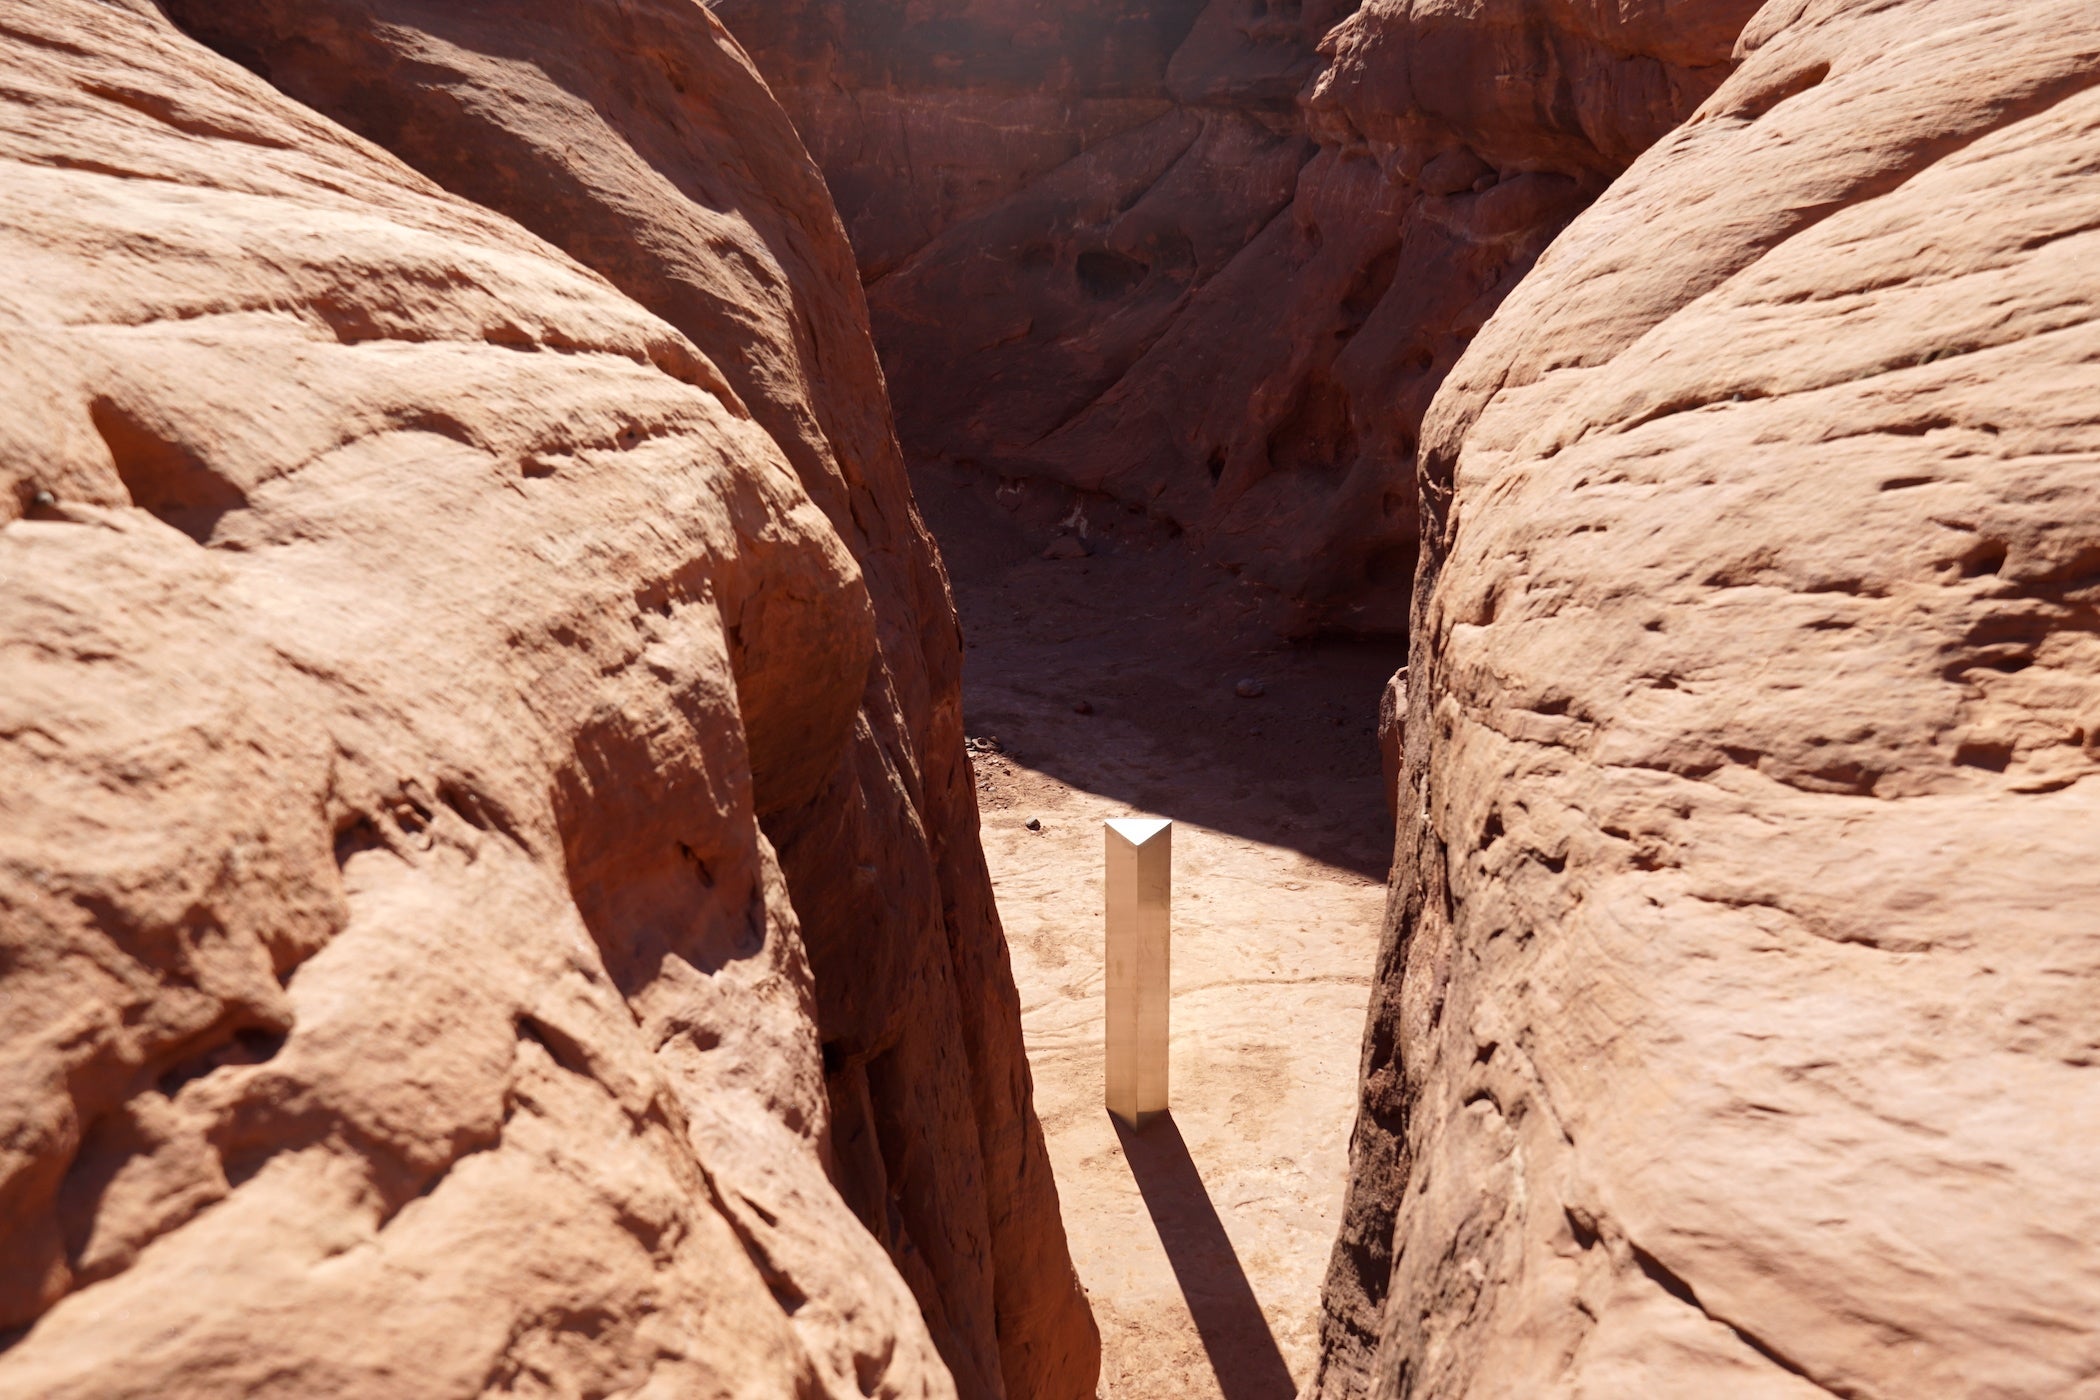 A view of the “monolith” from above, showing its intentional alignment with a narrow slot canyon.